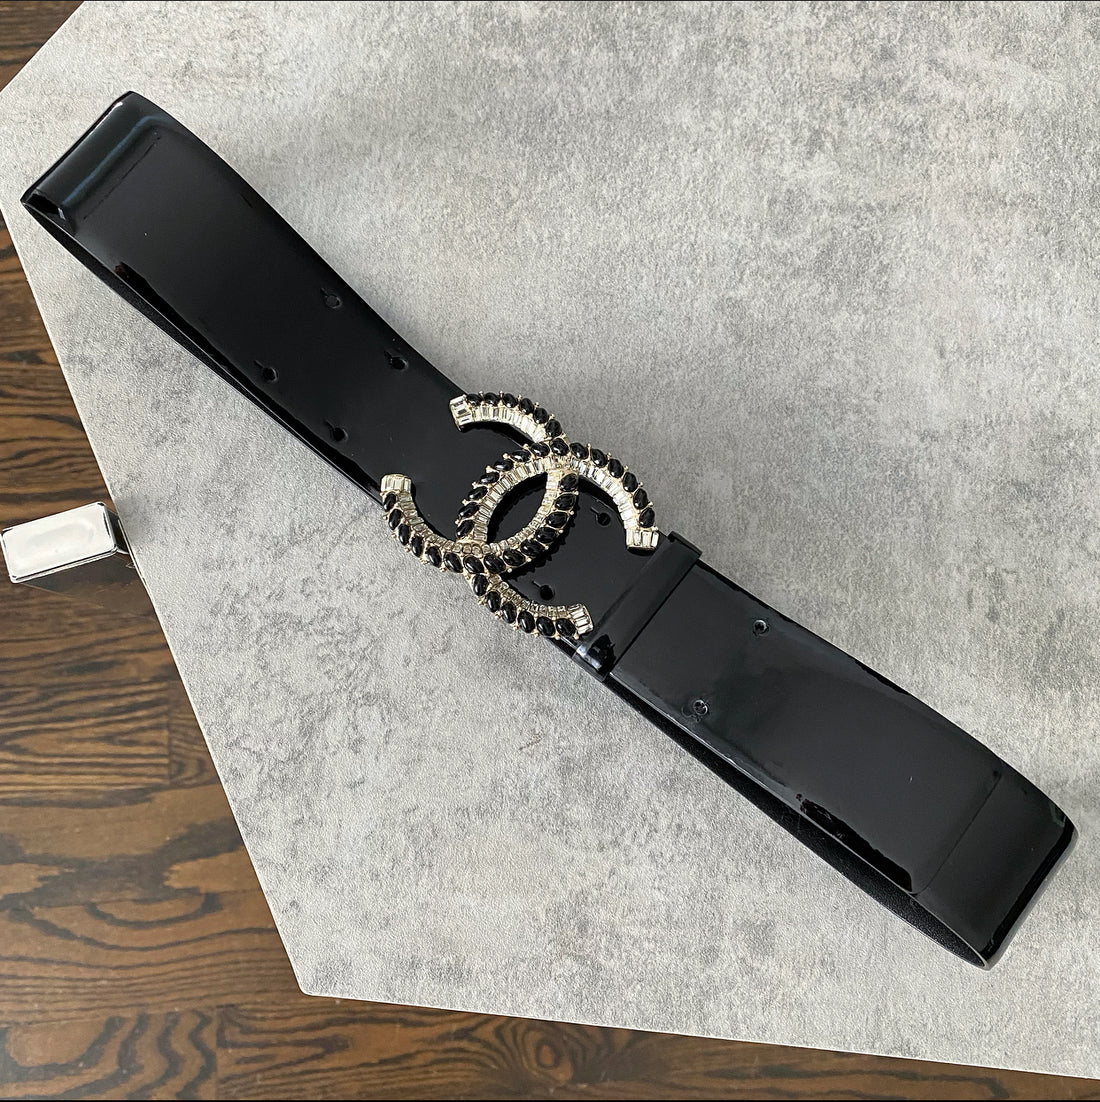 CHANEL-CoCo-Mark-Buckle-Leather-Belt-Black-85/34-08C